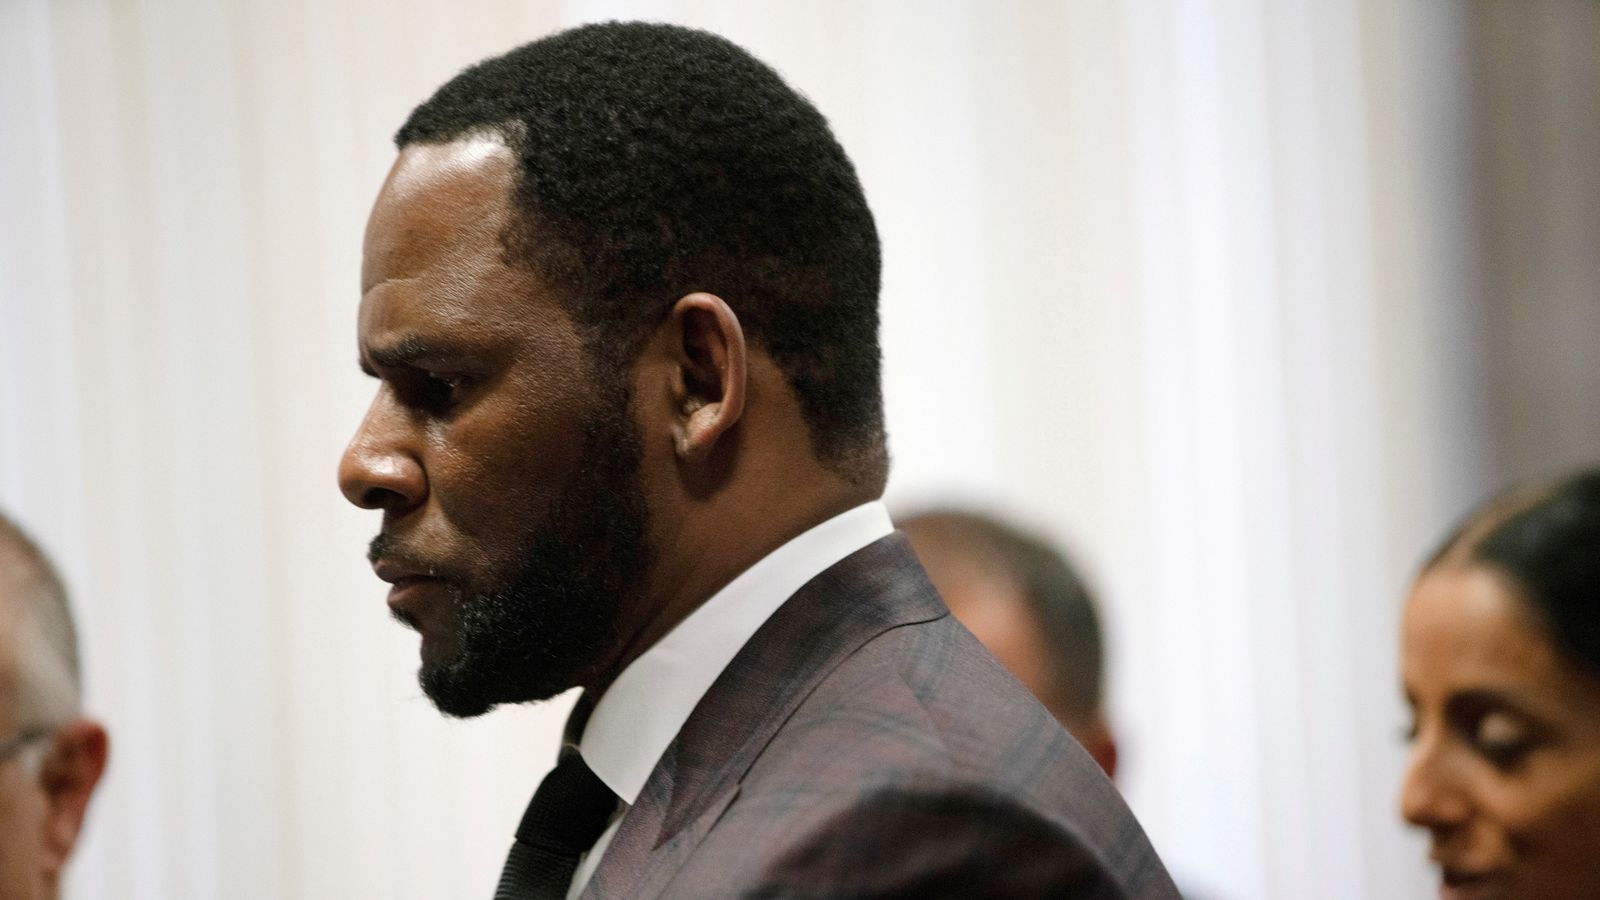 R Kelly The key allegations made in court during his trial as singer